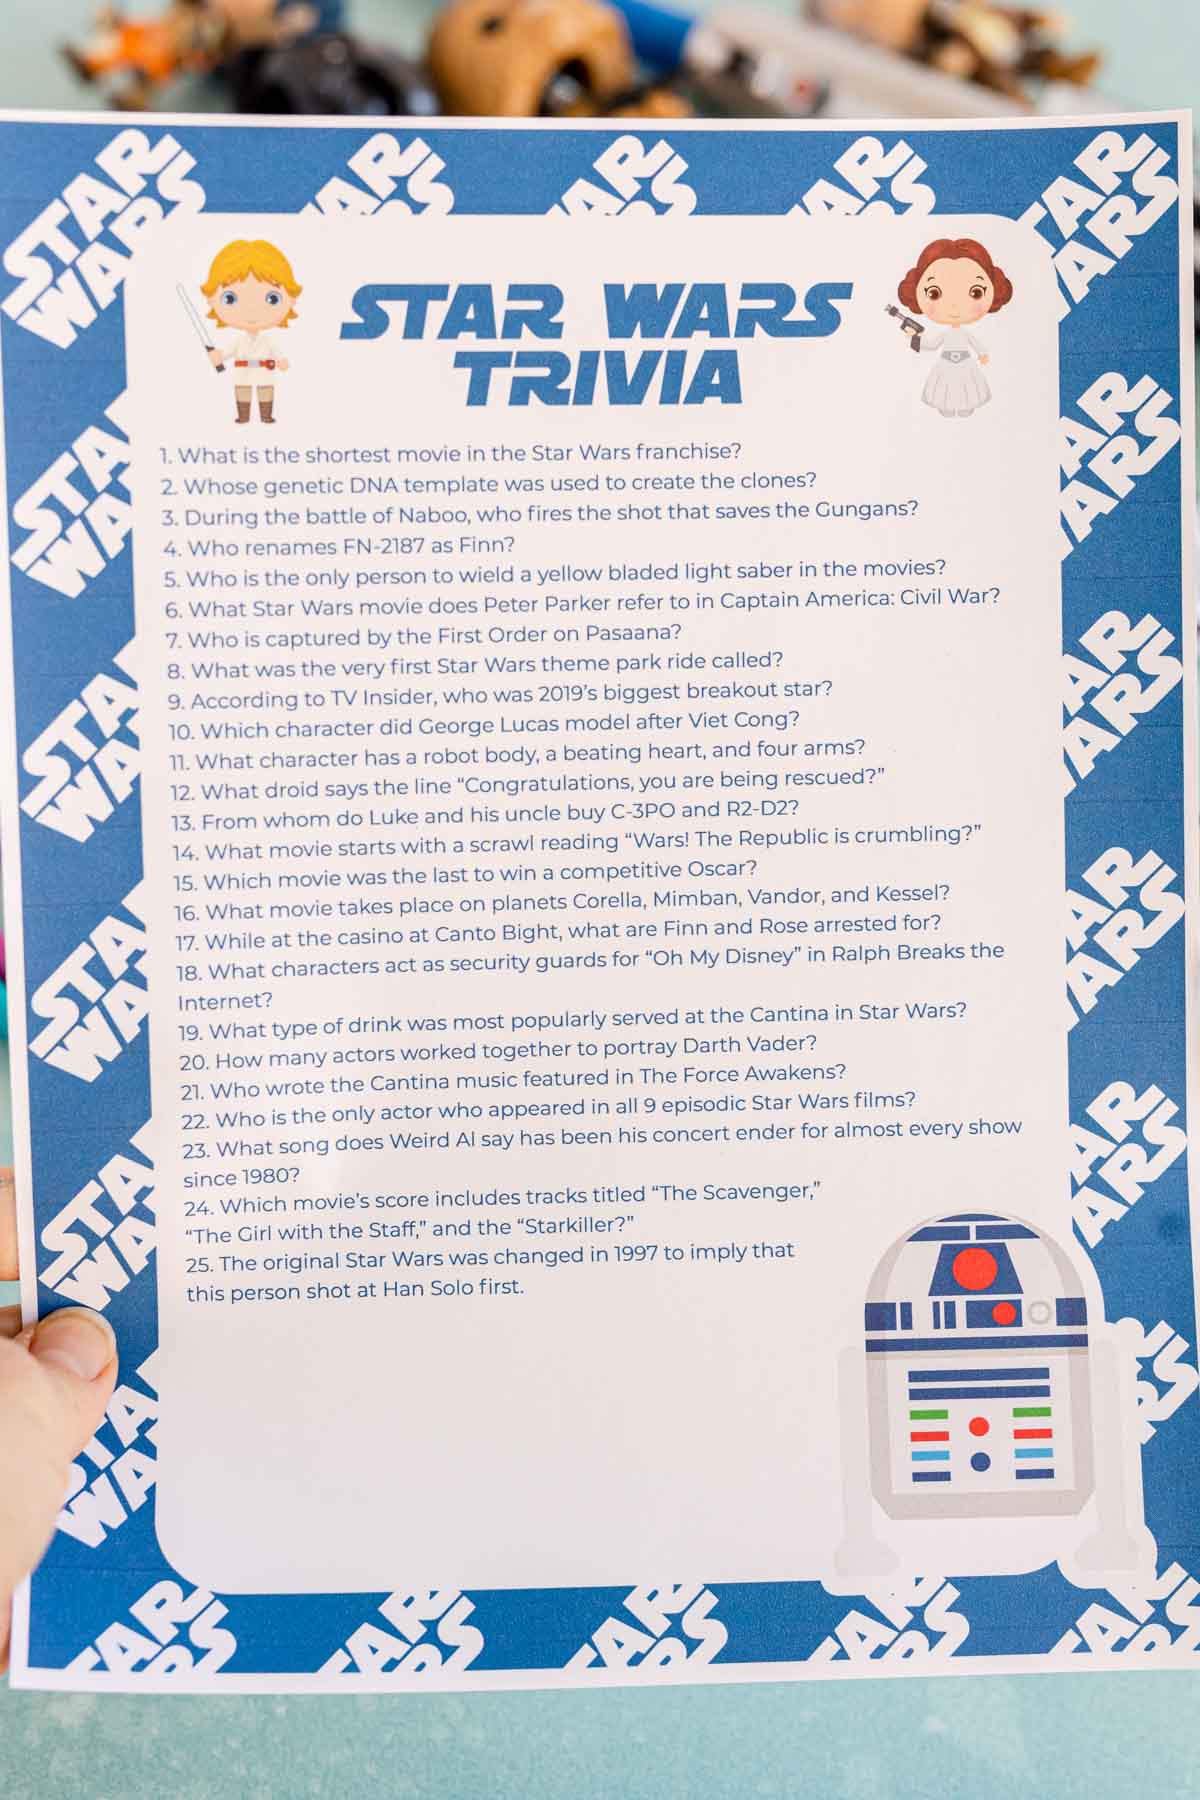 Printed out Star Wars trivia questions